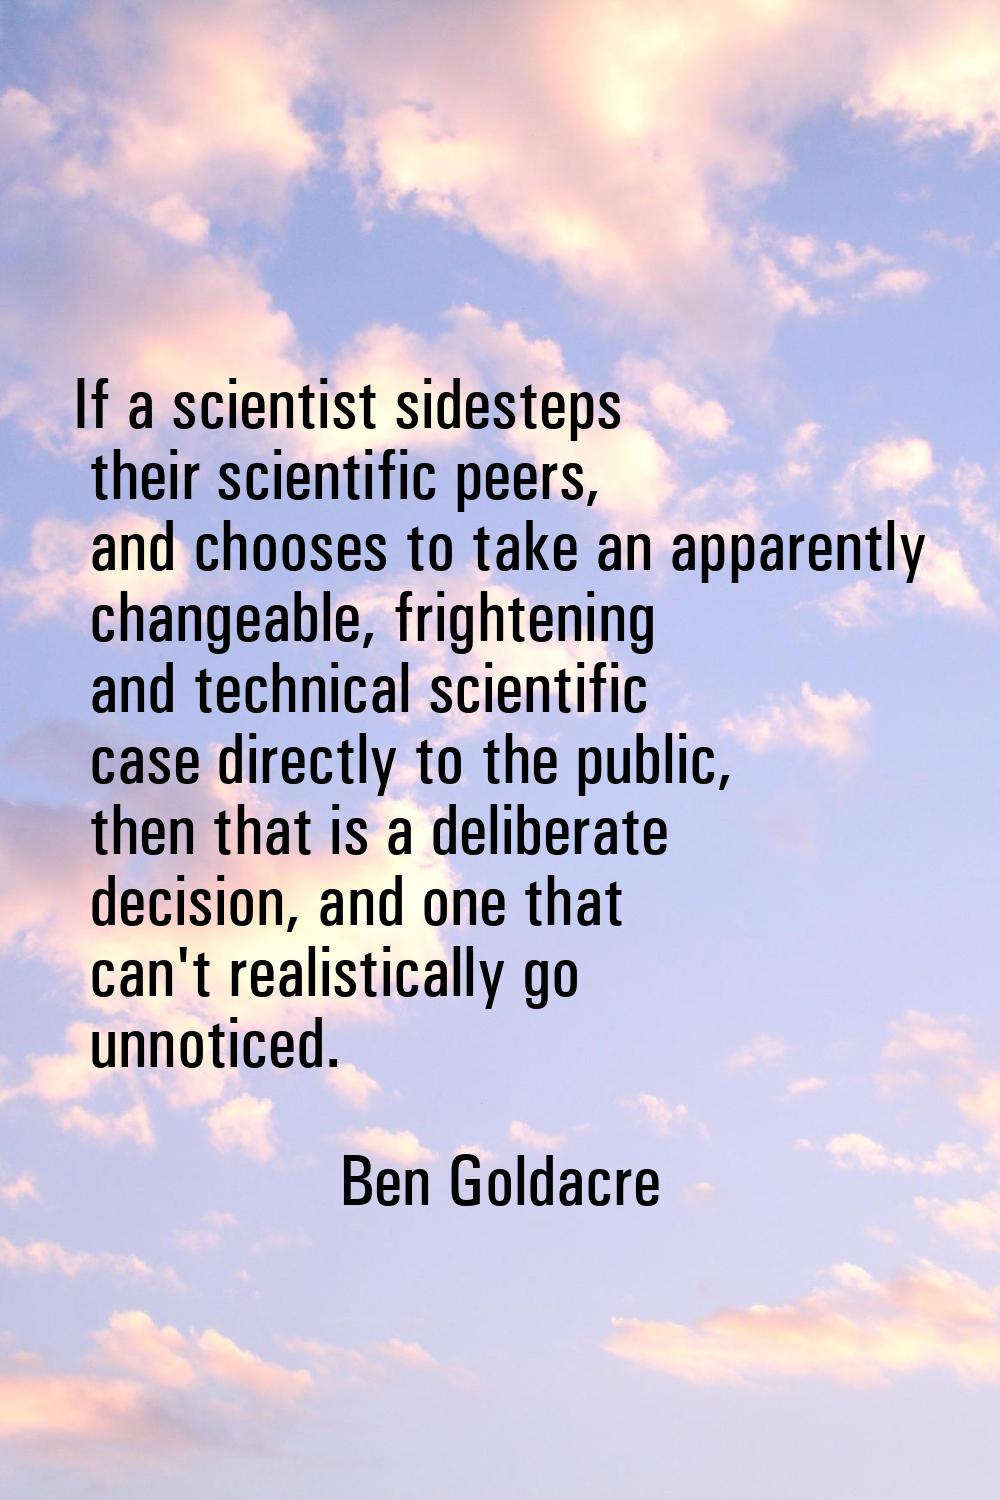 If a scientist sidesteps their scientific peers, and chooses to take an apparently changeable, frig